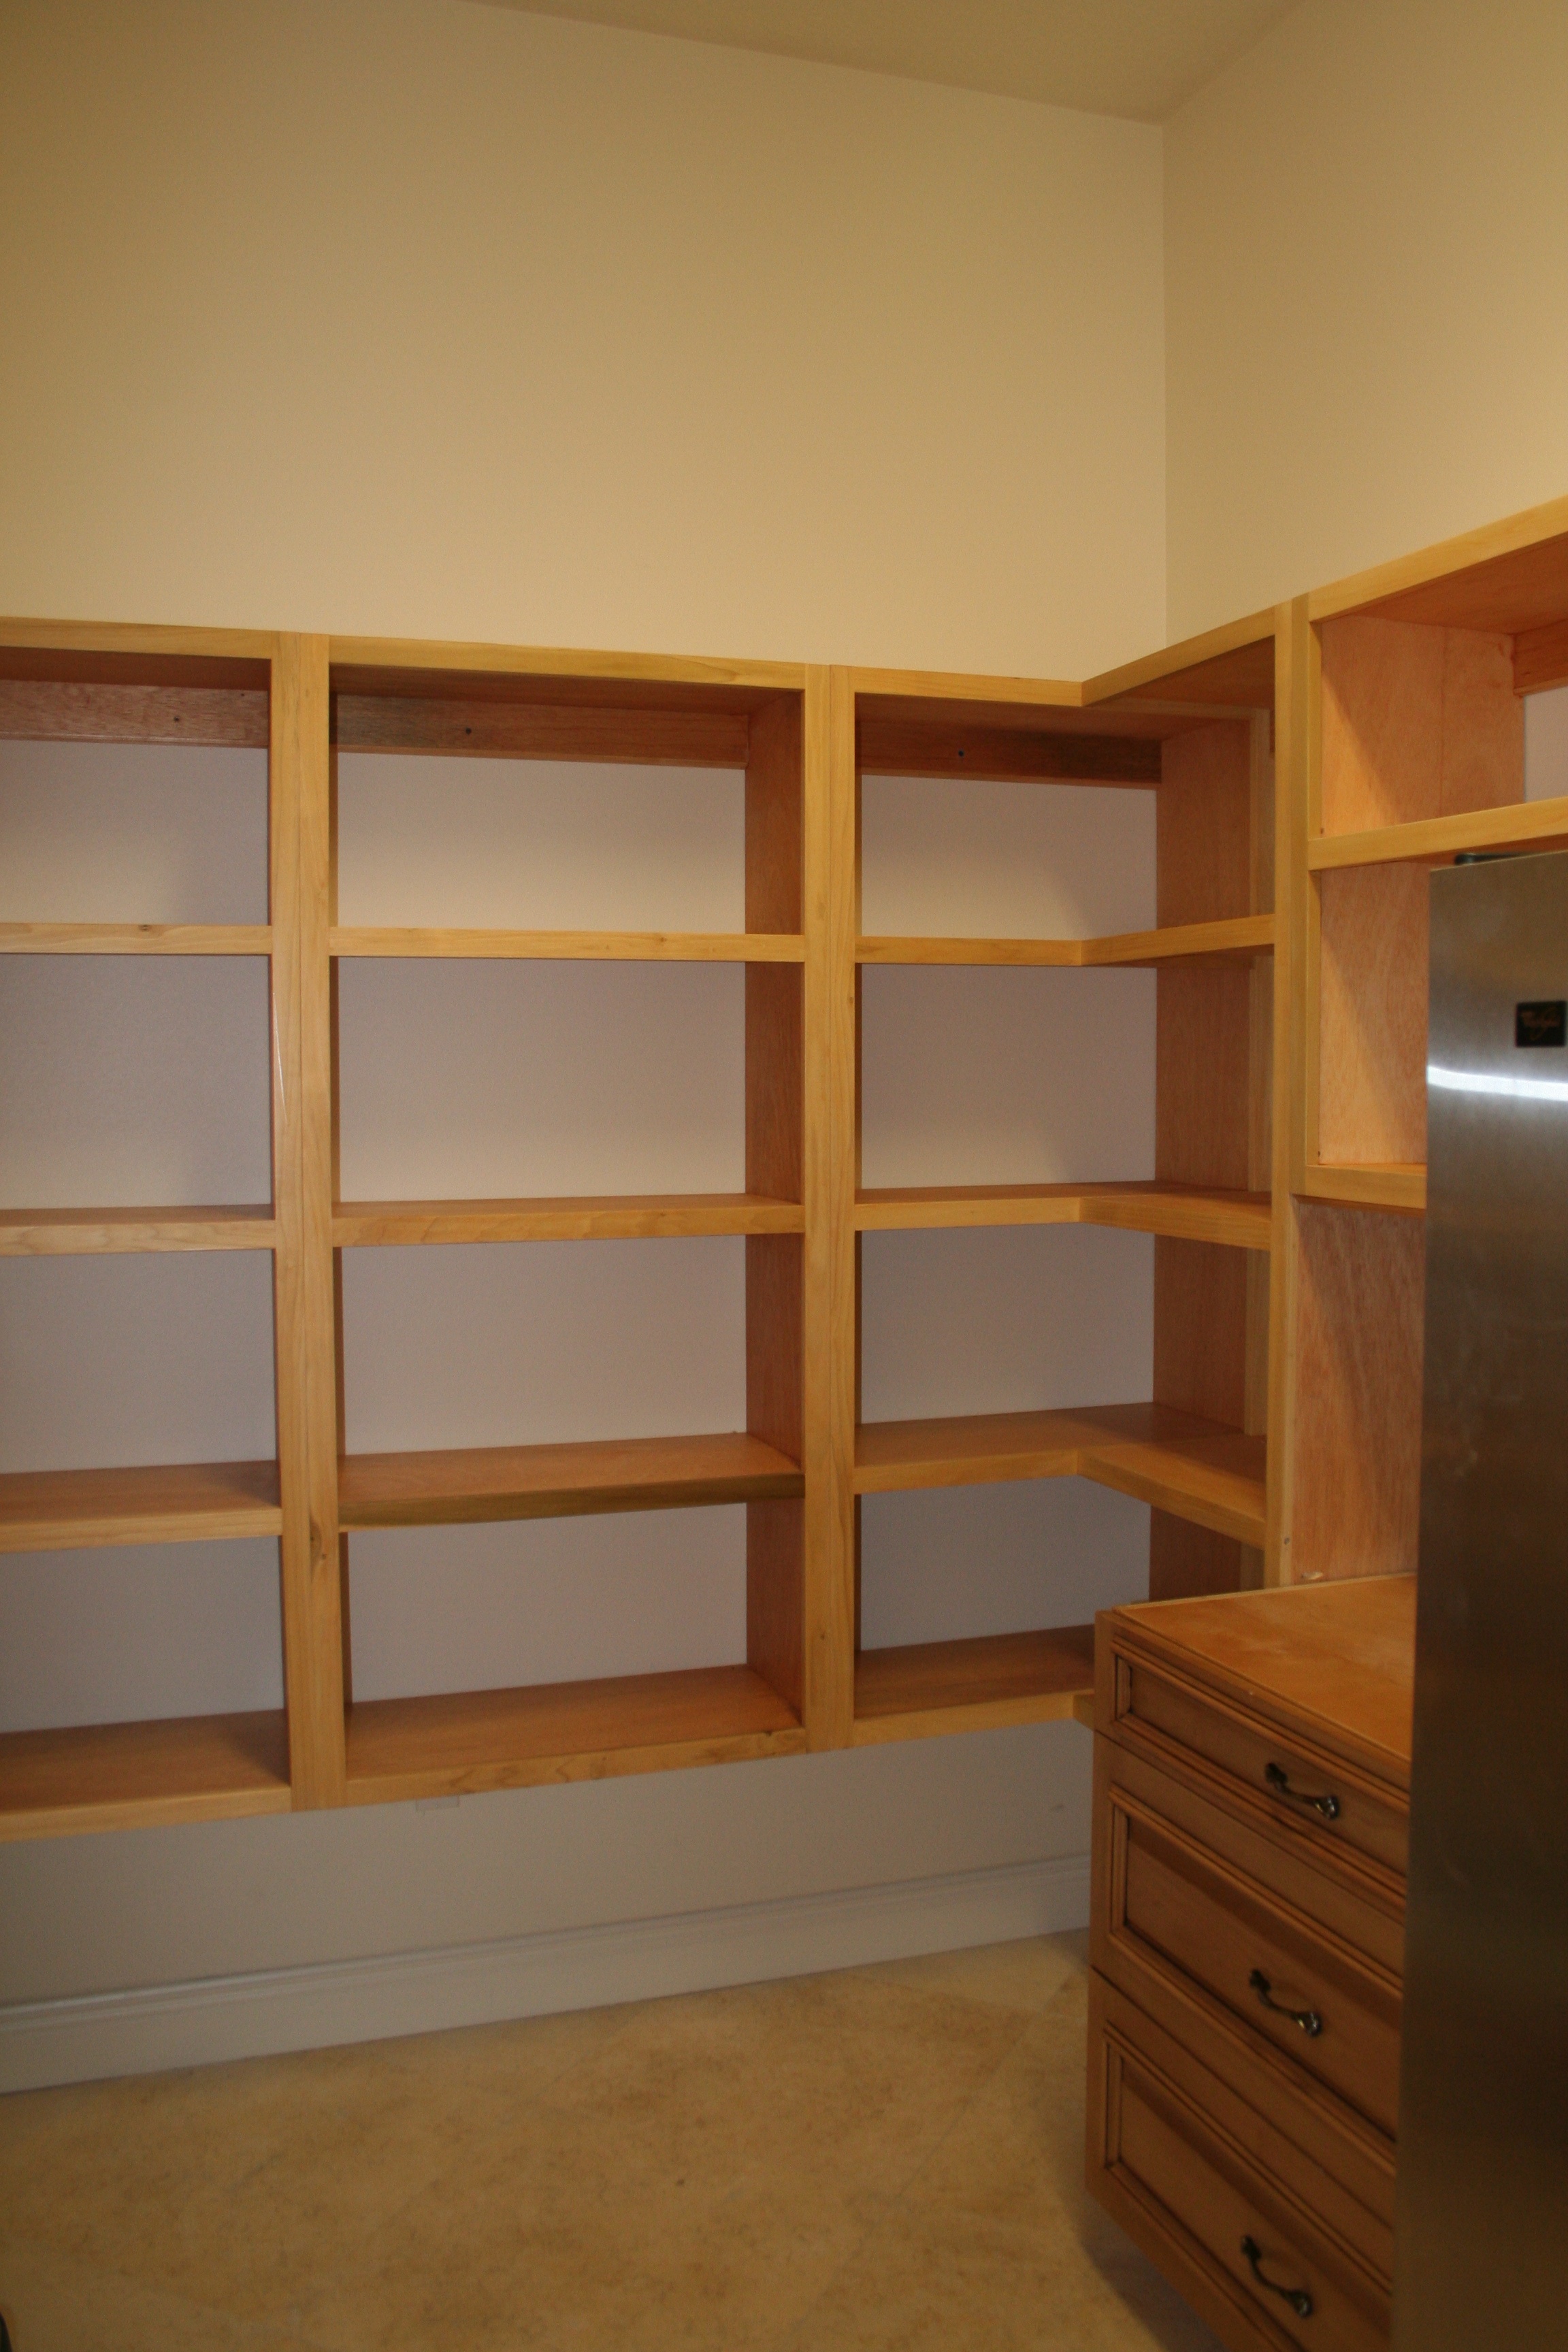 pantry shelving systems wood photo - 1